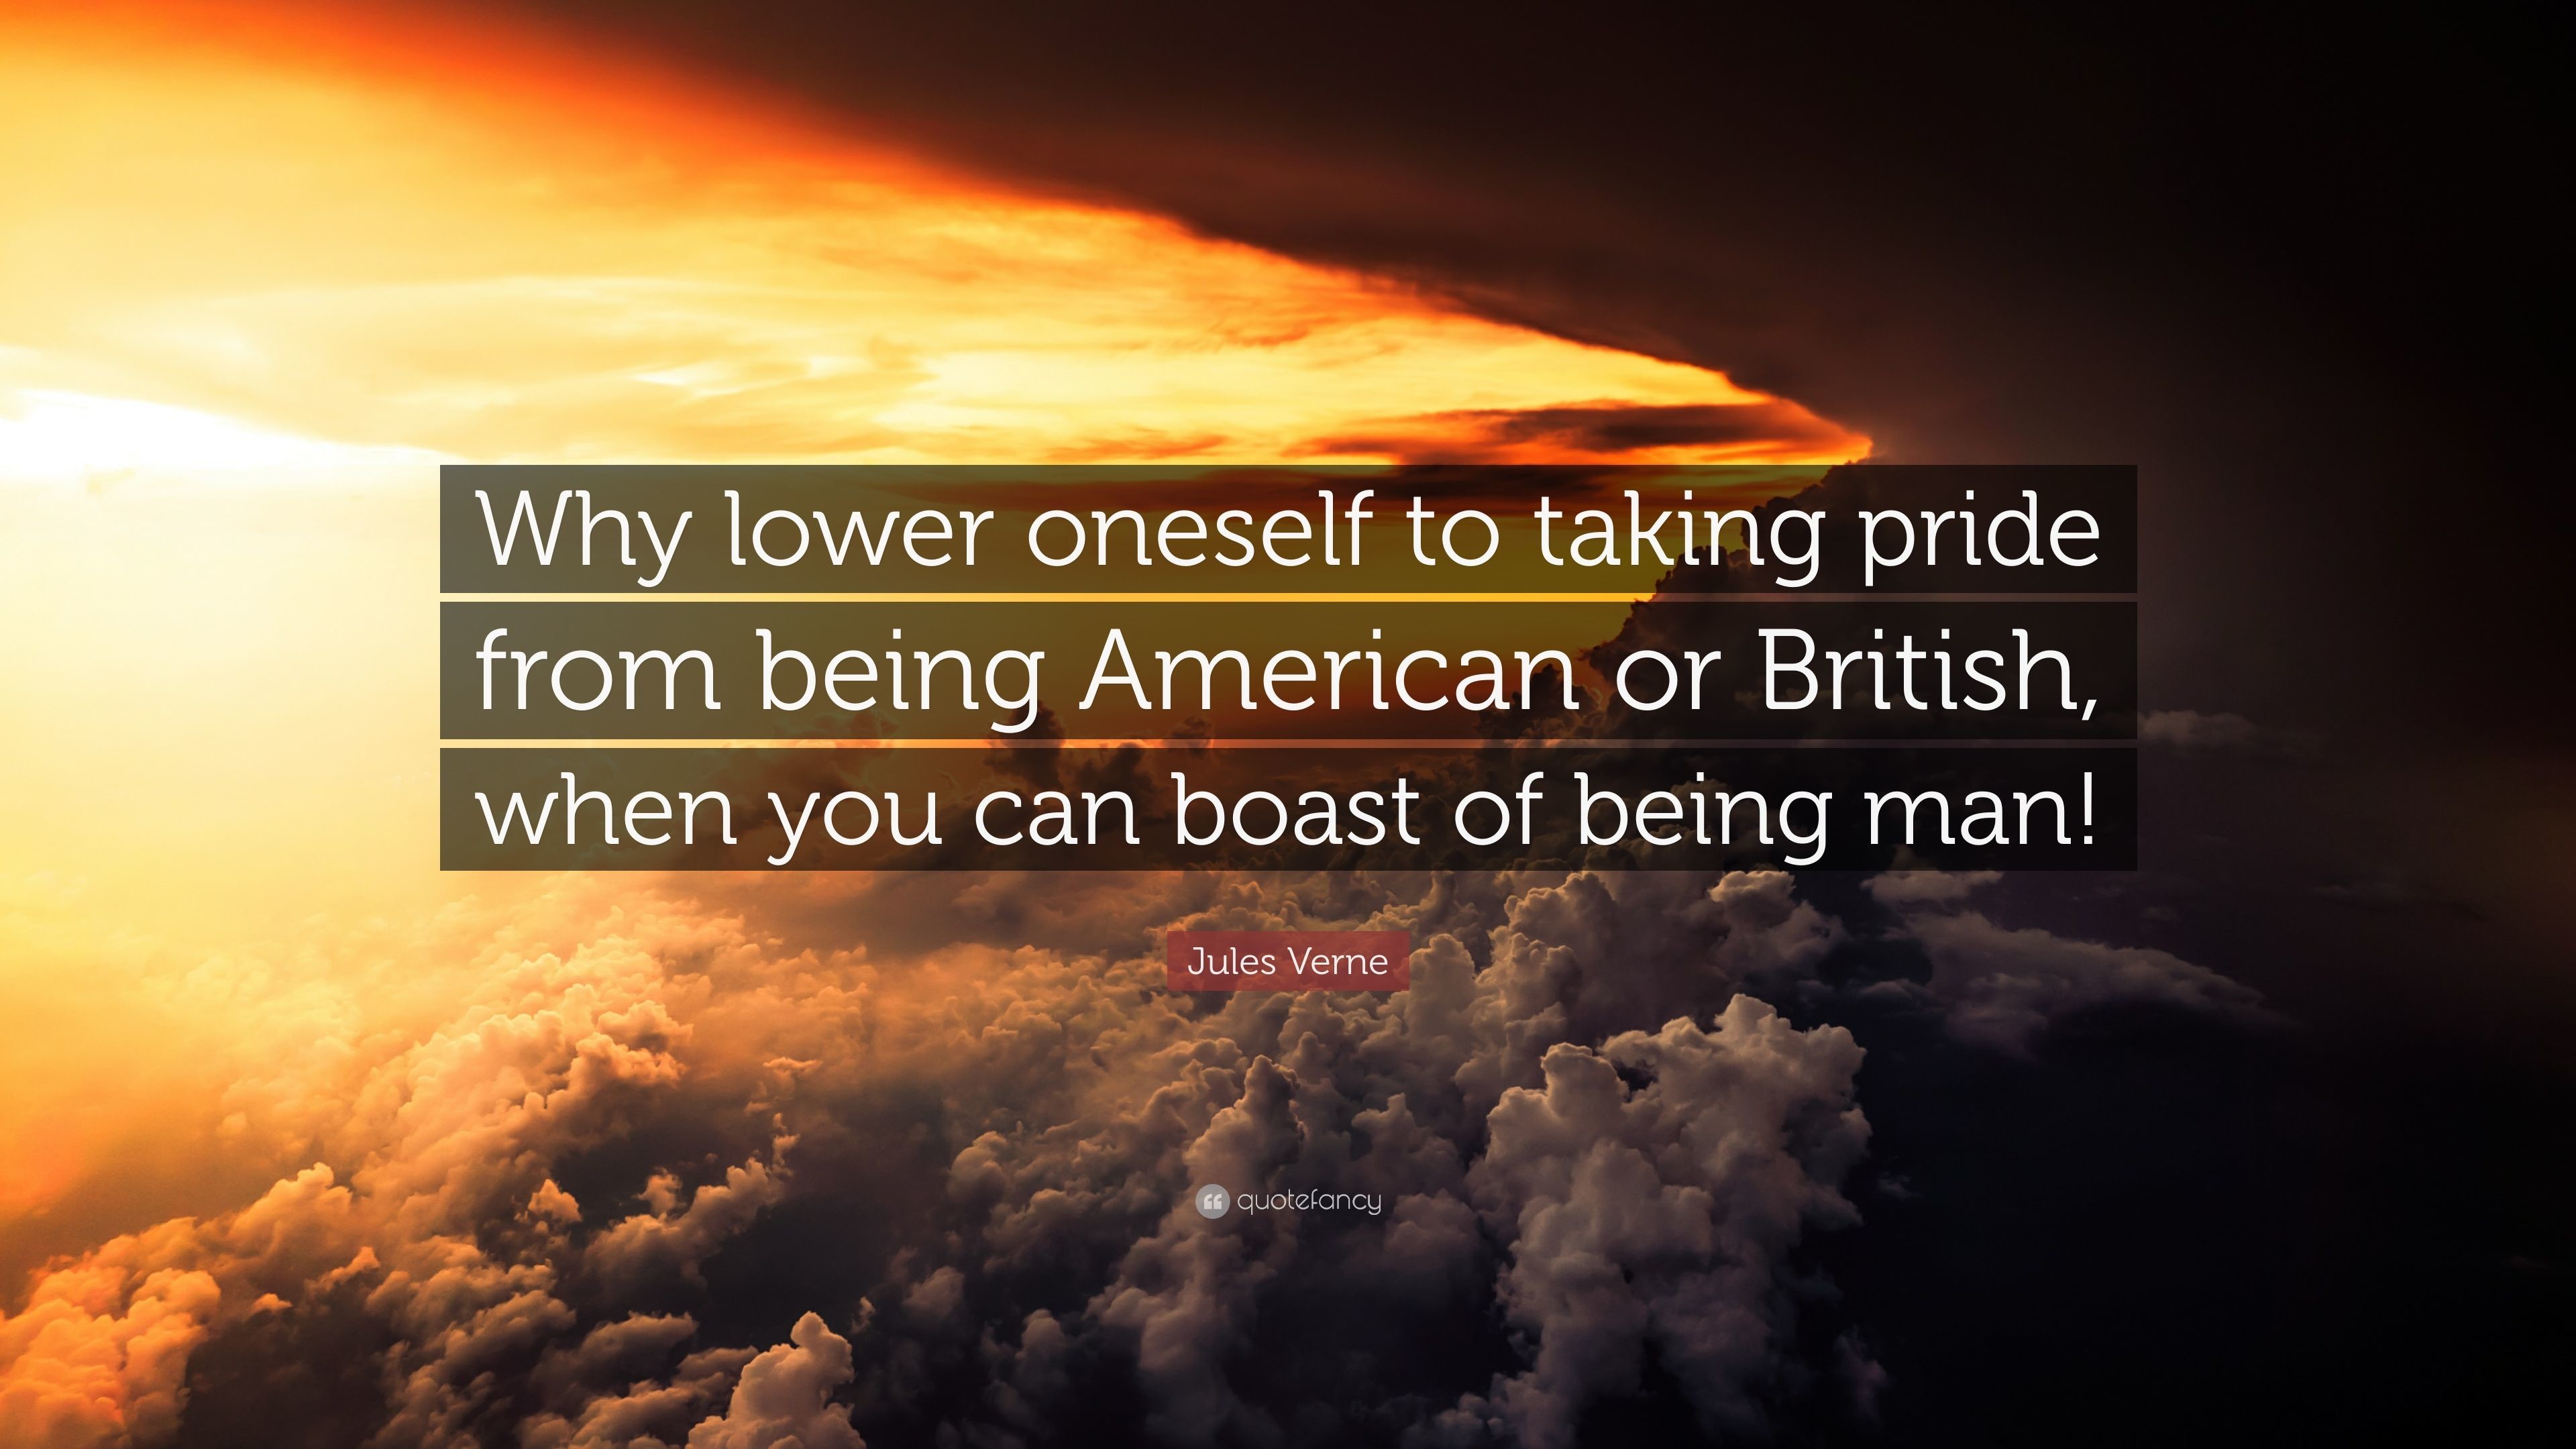 3840x2160 Jules Verne Quote: “Why lower oneself to taking pride from being American  or British